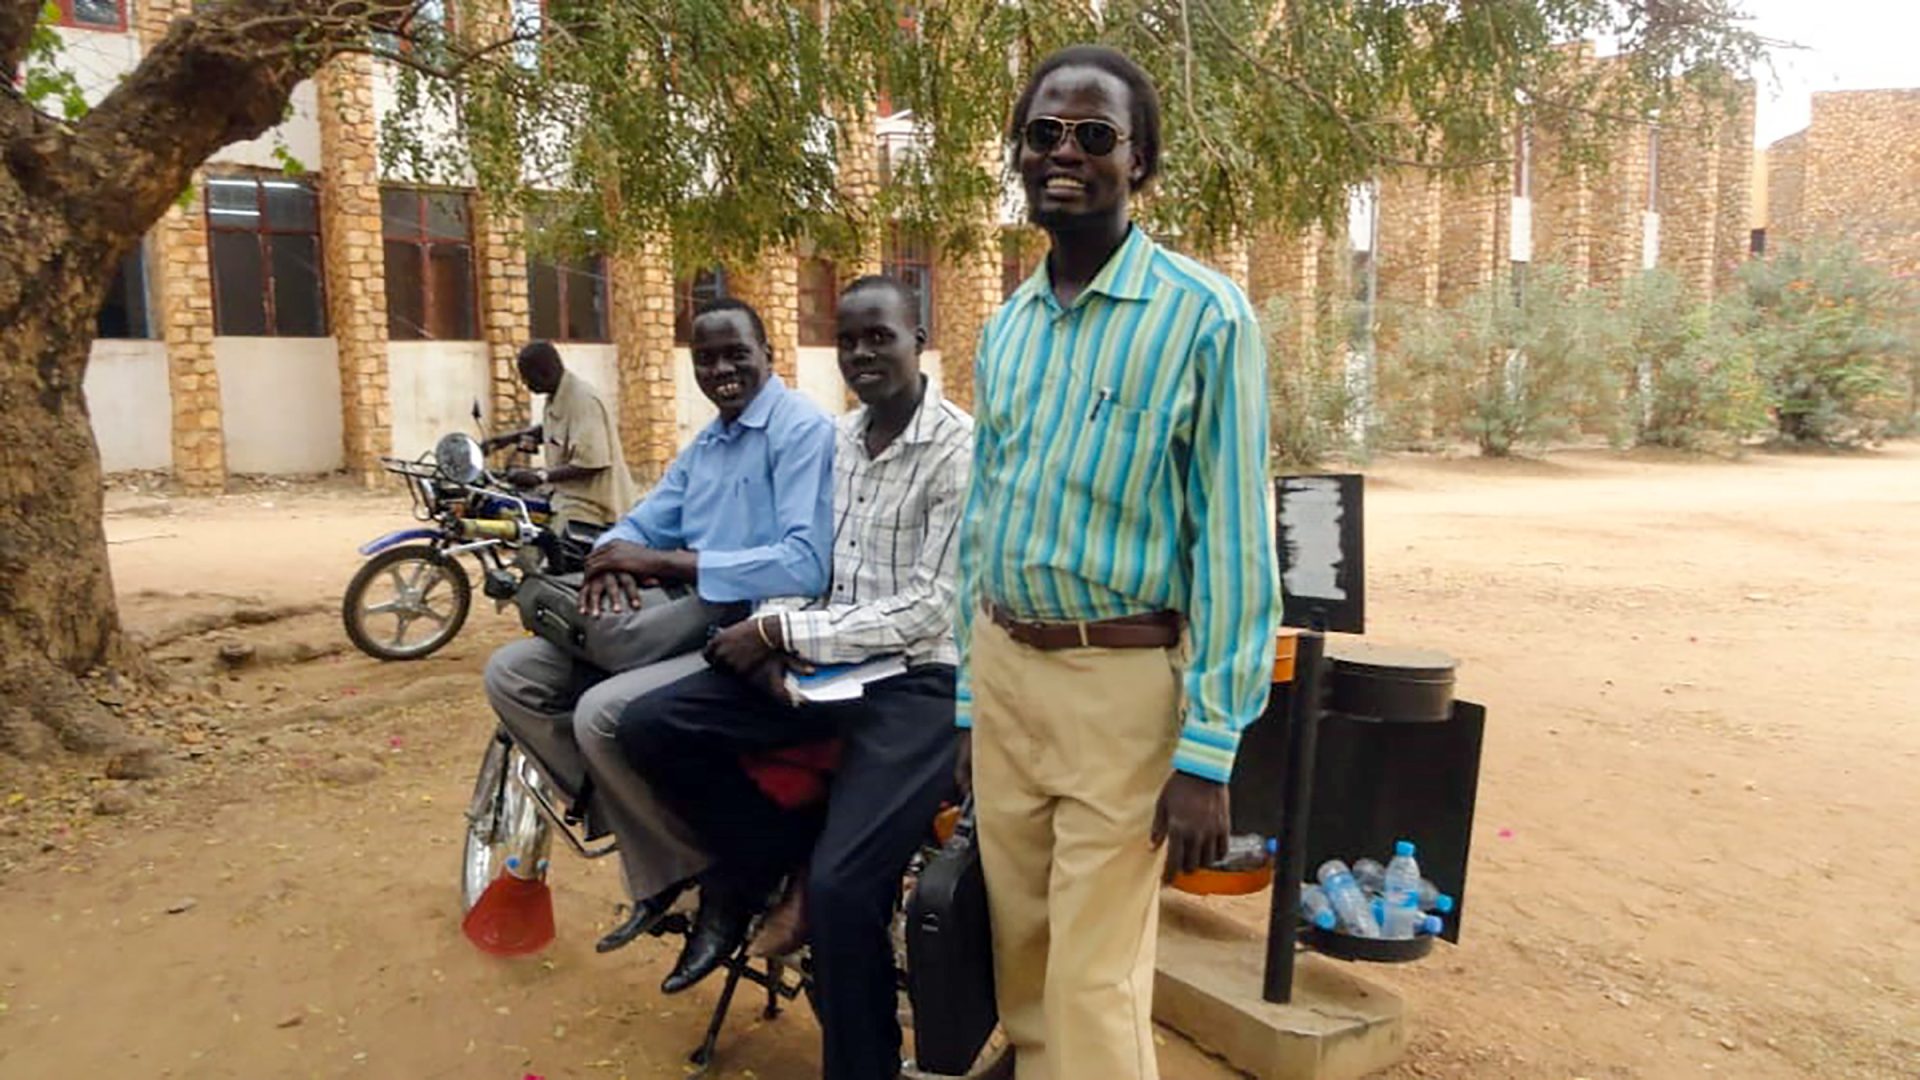 Simon Yomkuey at the University of Juba, in 2009, with two of his companions